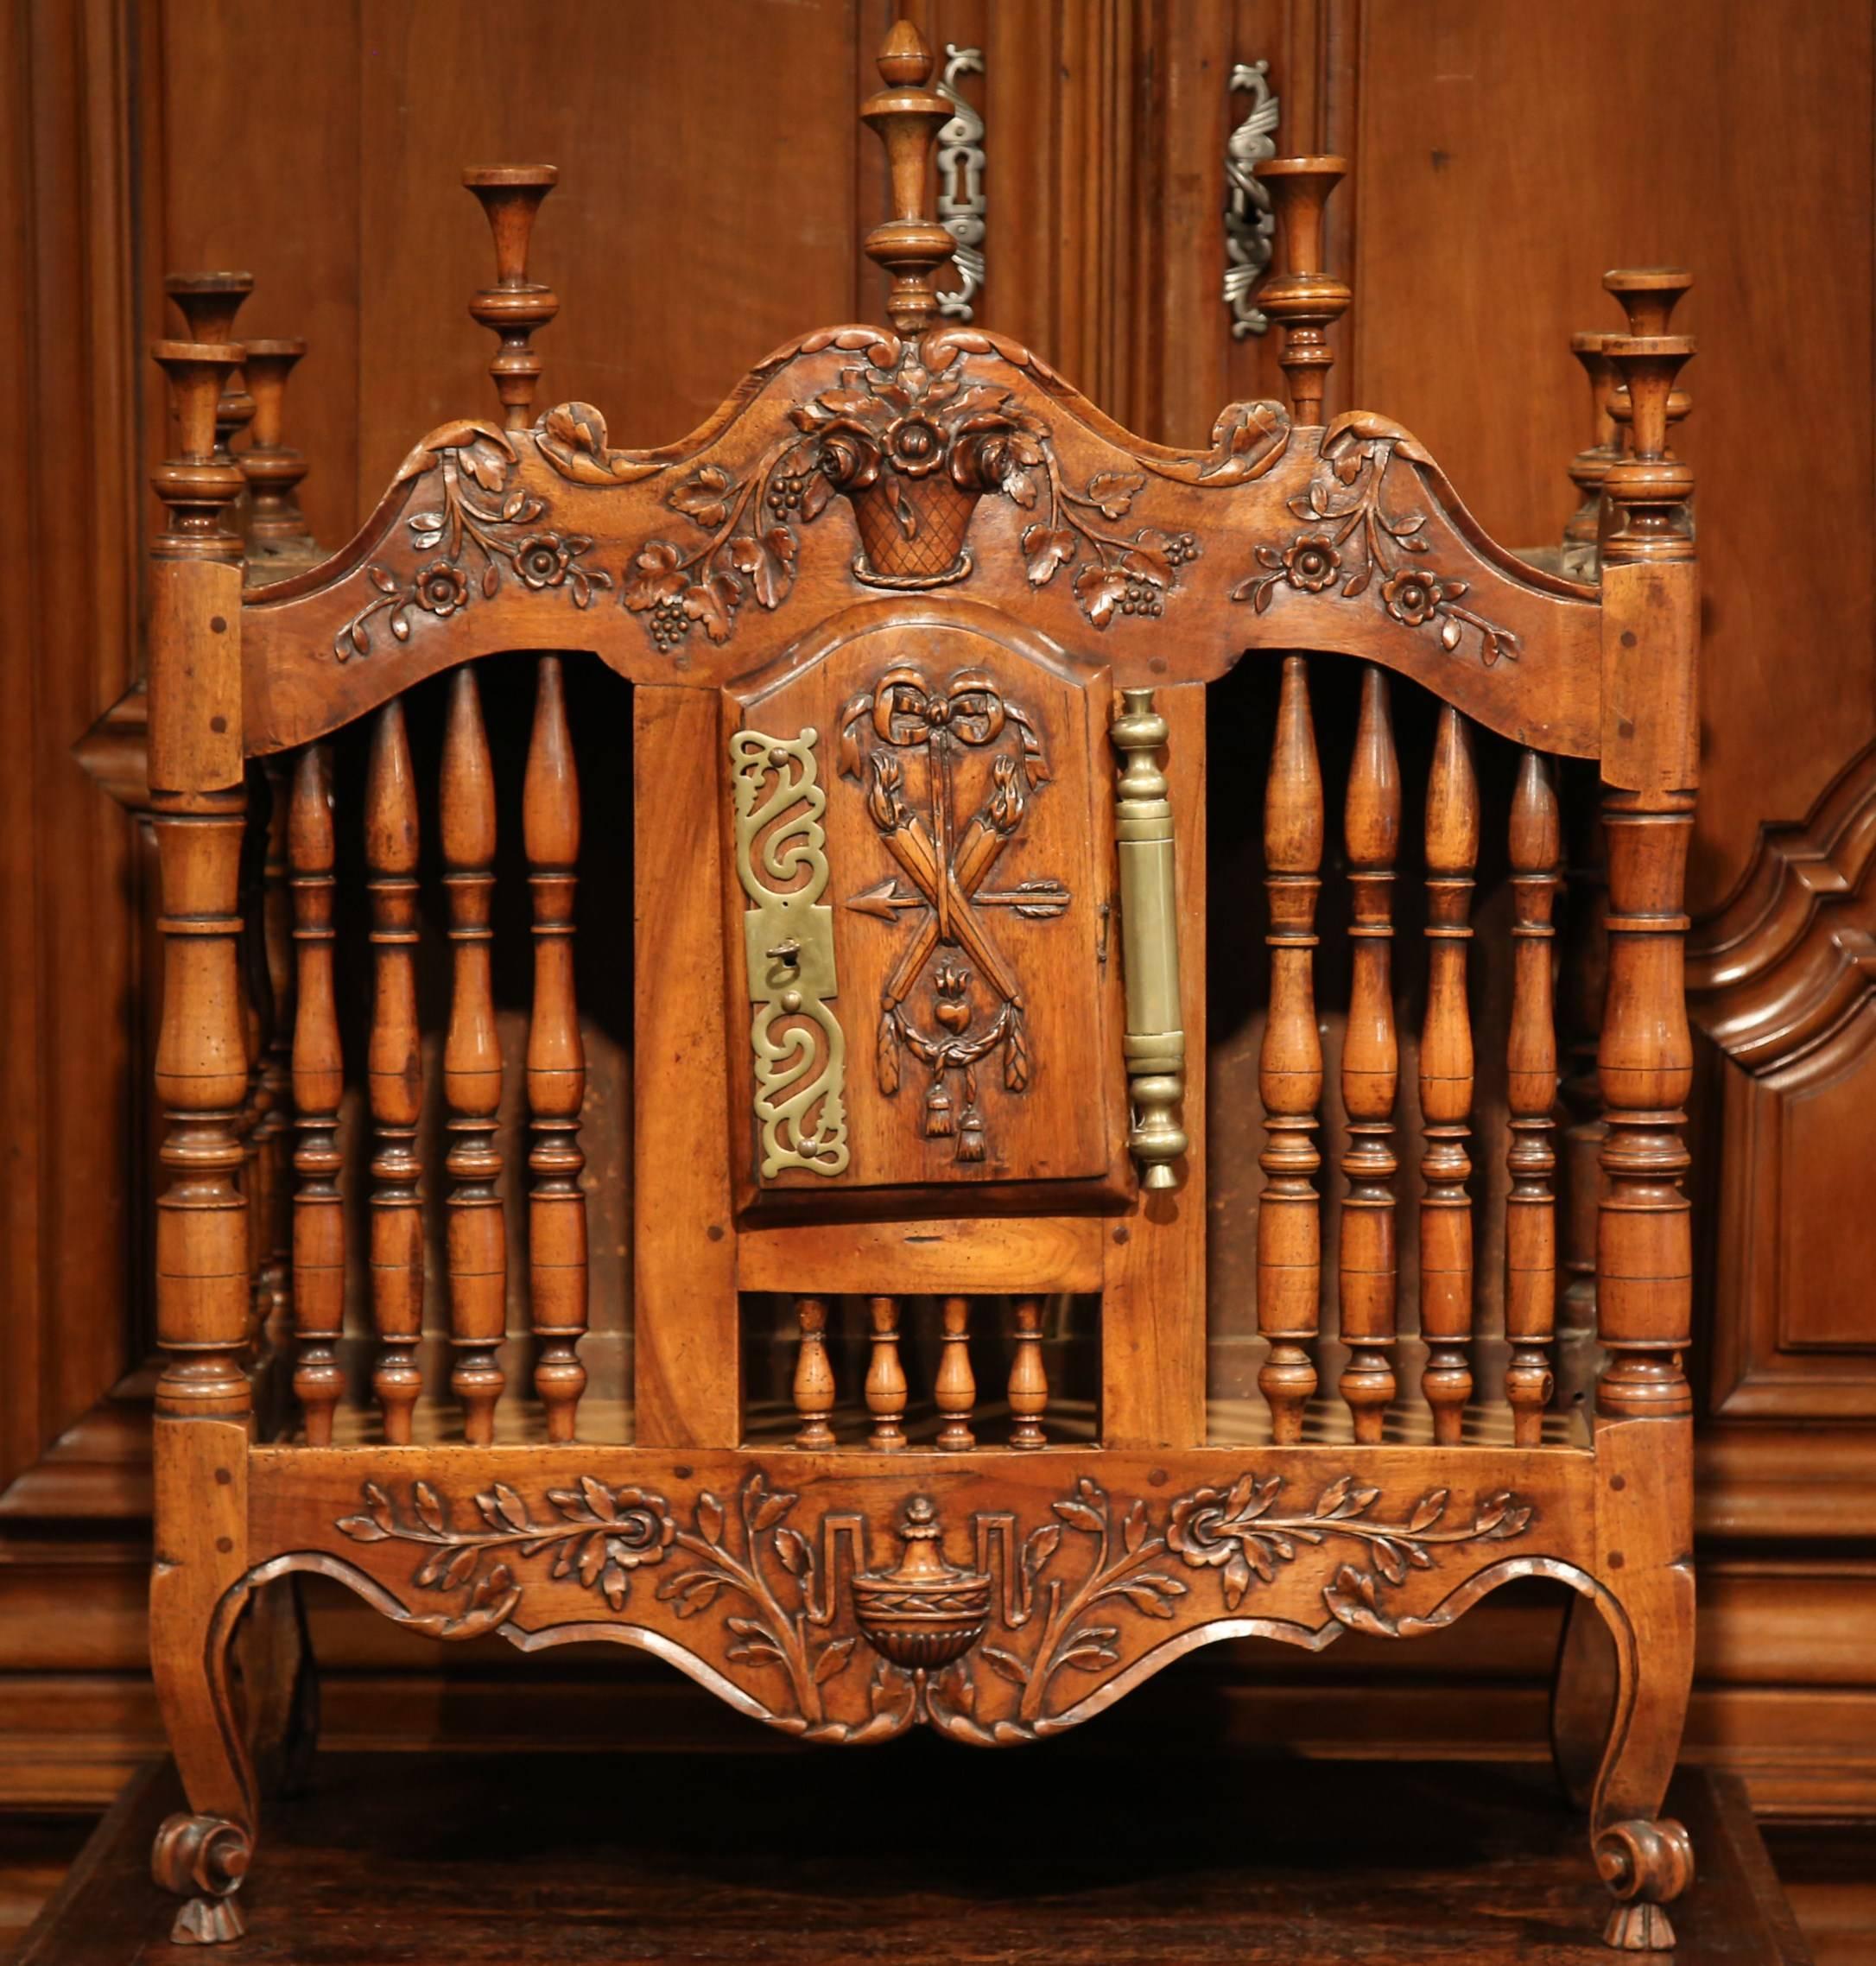 This exquisite, antique fruitwood panetiere was carved in Southern France, circa 1850. In 18th century Provence, the panetiere (or bread box), was used as a practical wall cabinet in which freshly made bread was stored. The decorative cabinet is